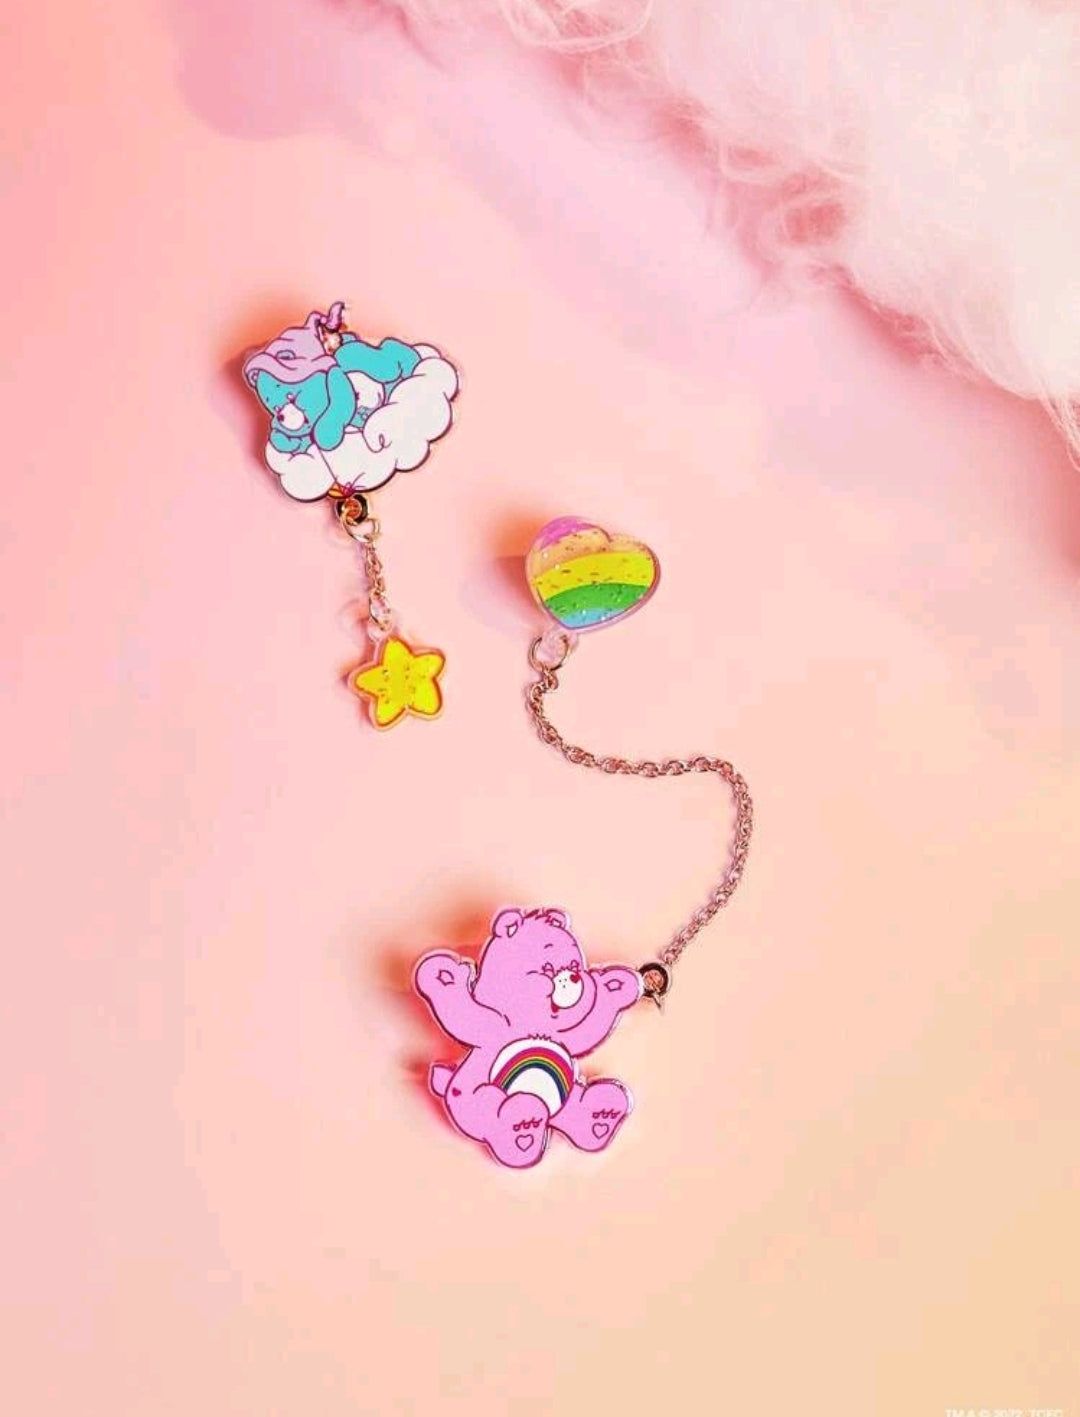 A pair of pins with cartoon characters on them - Care Bears